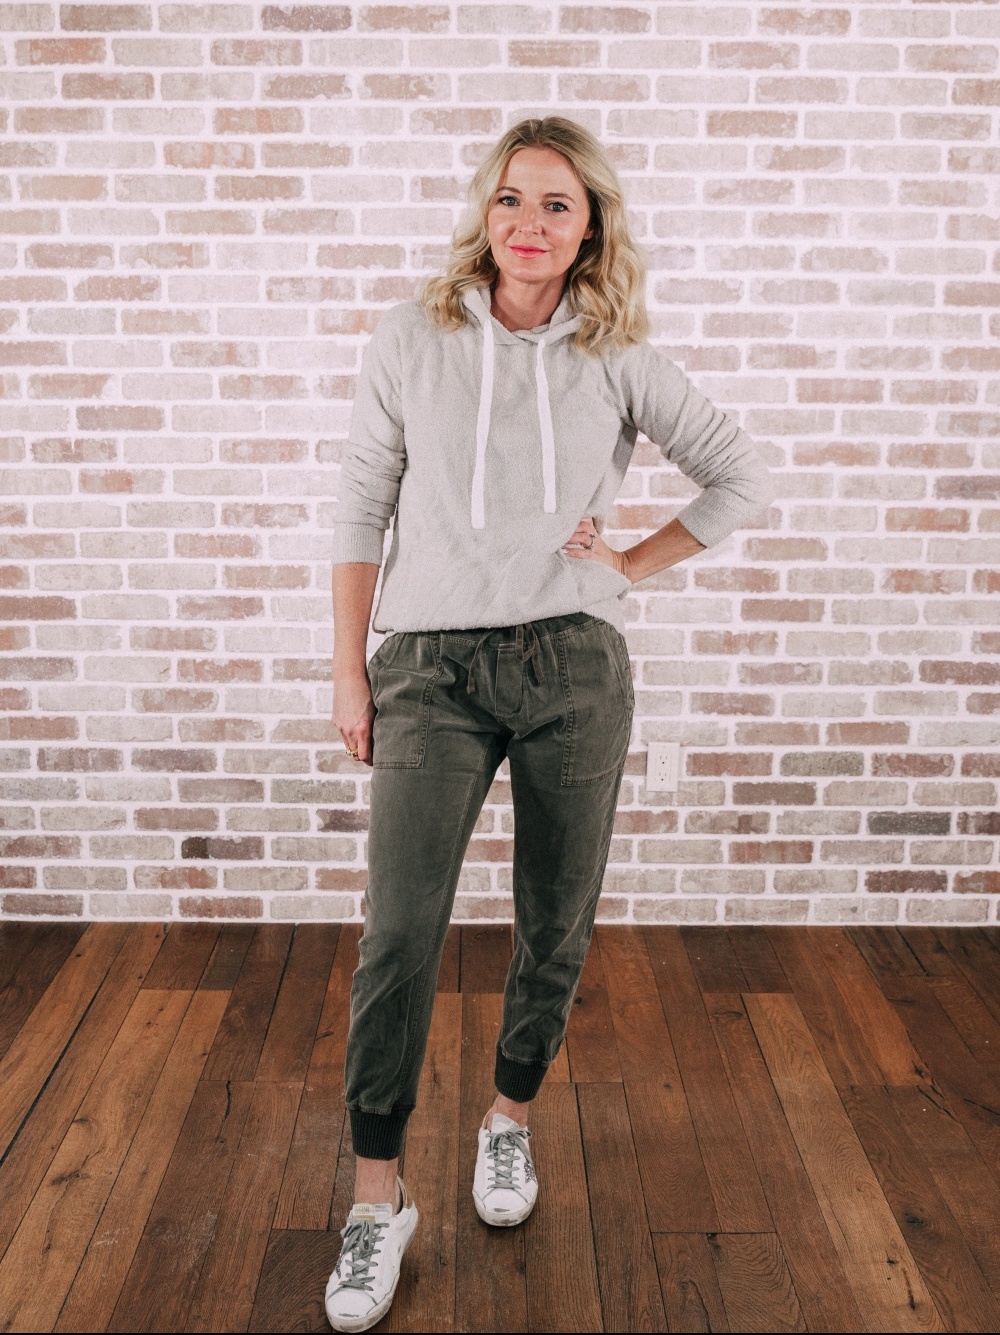 Loungewear Outfits, Fashion blogger Erin Busbee of BusbeeStyle.com sharing her favorite loungewear including a Barefoot Dreams hoodie and utility trend James Perse green joggers in Telluride, Colorado